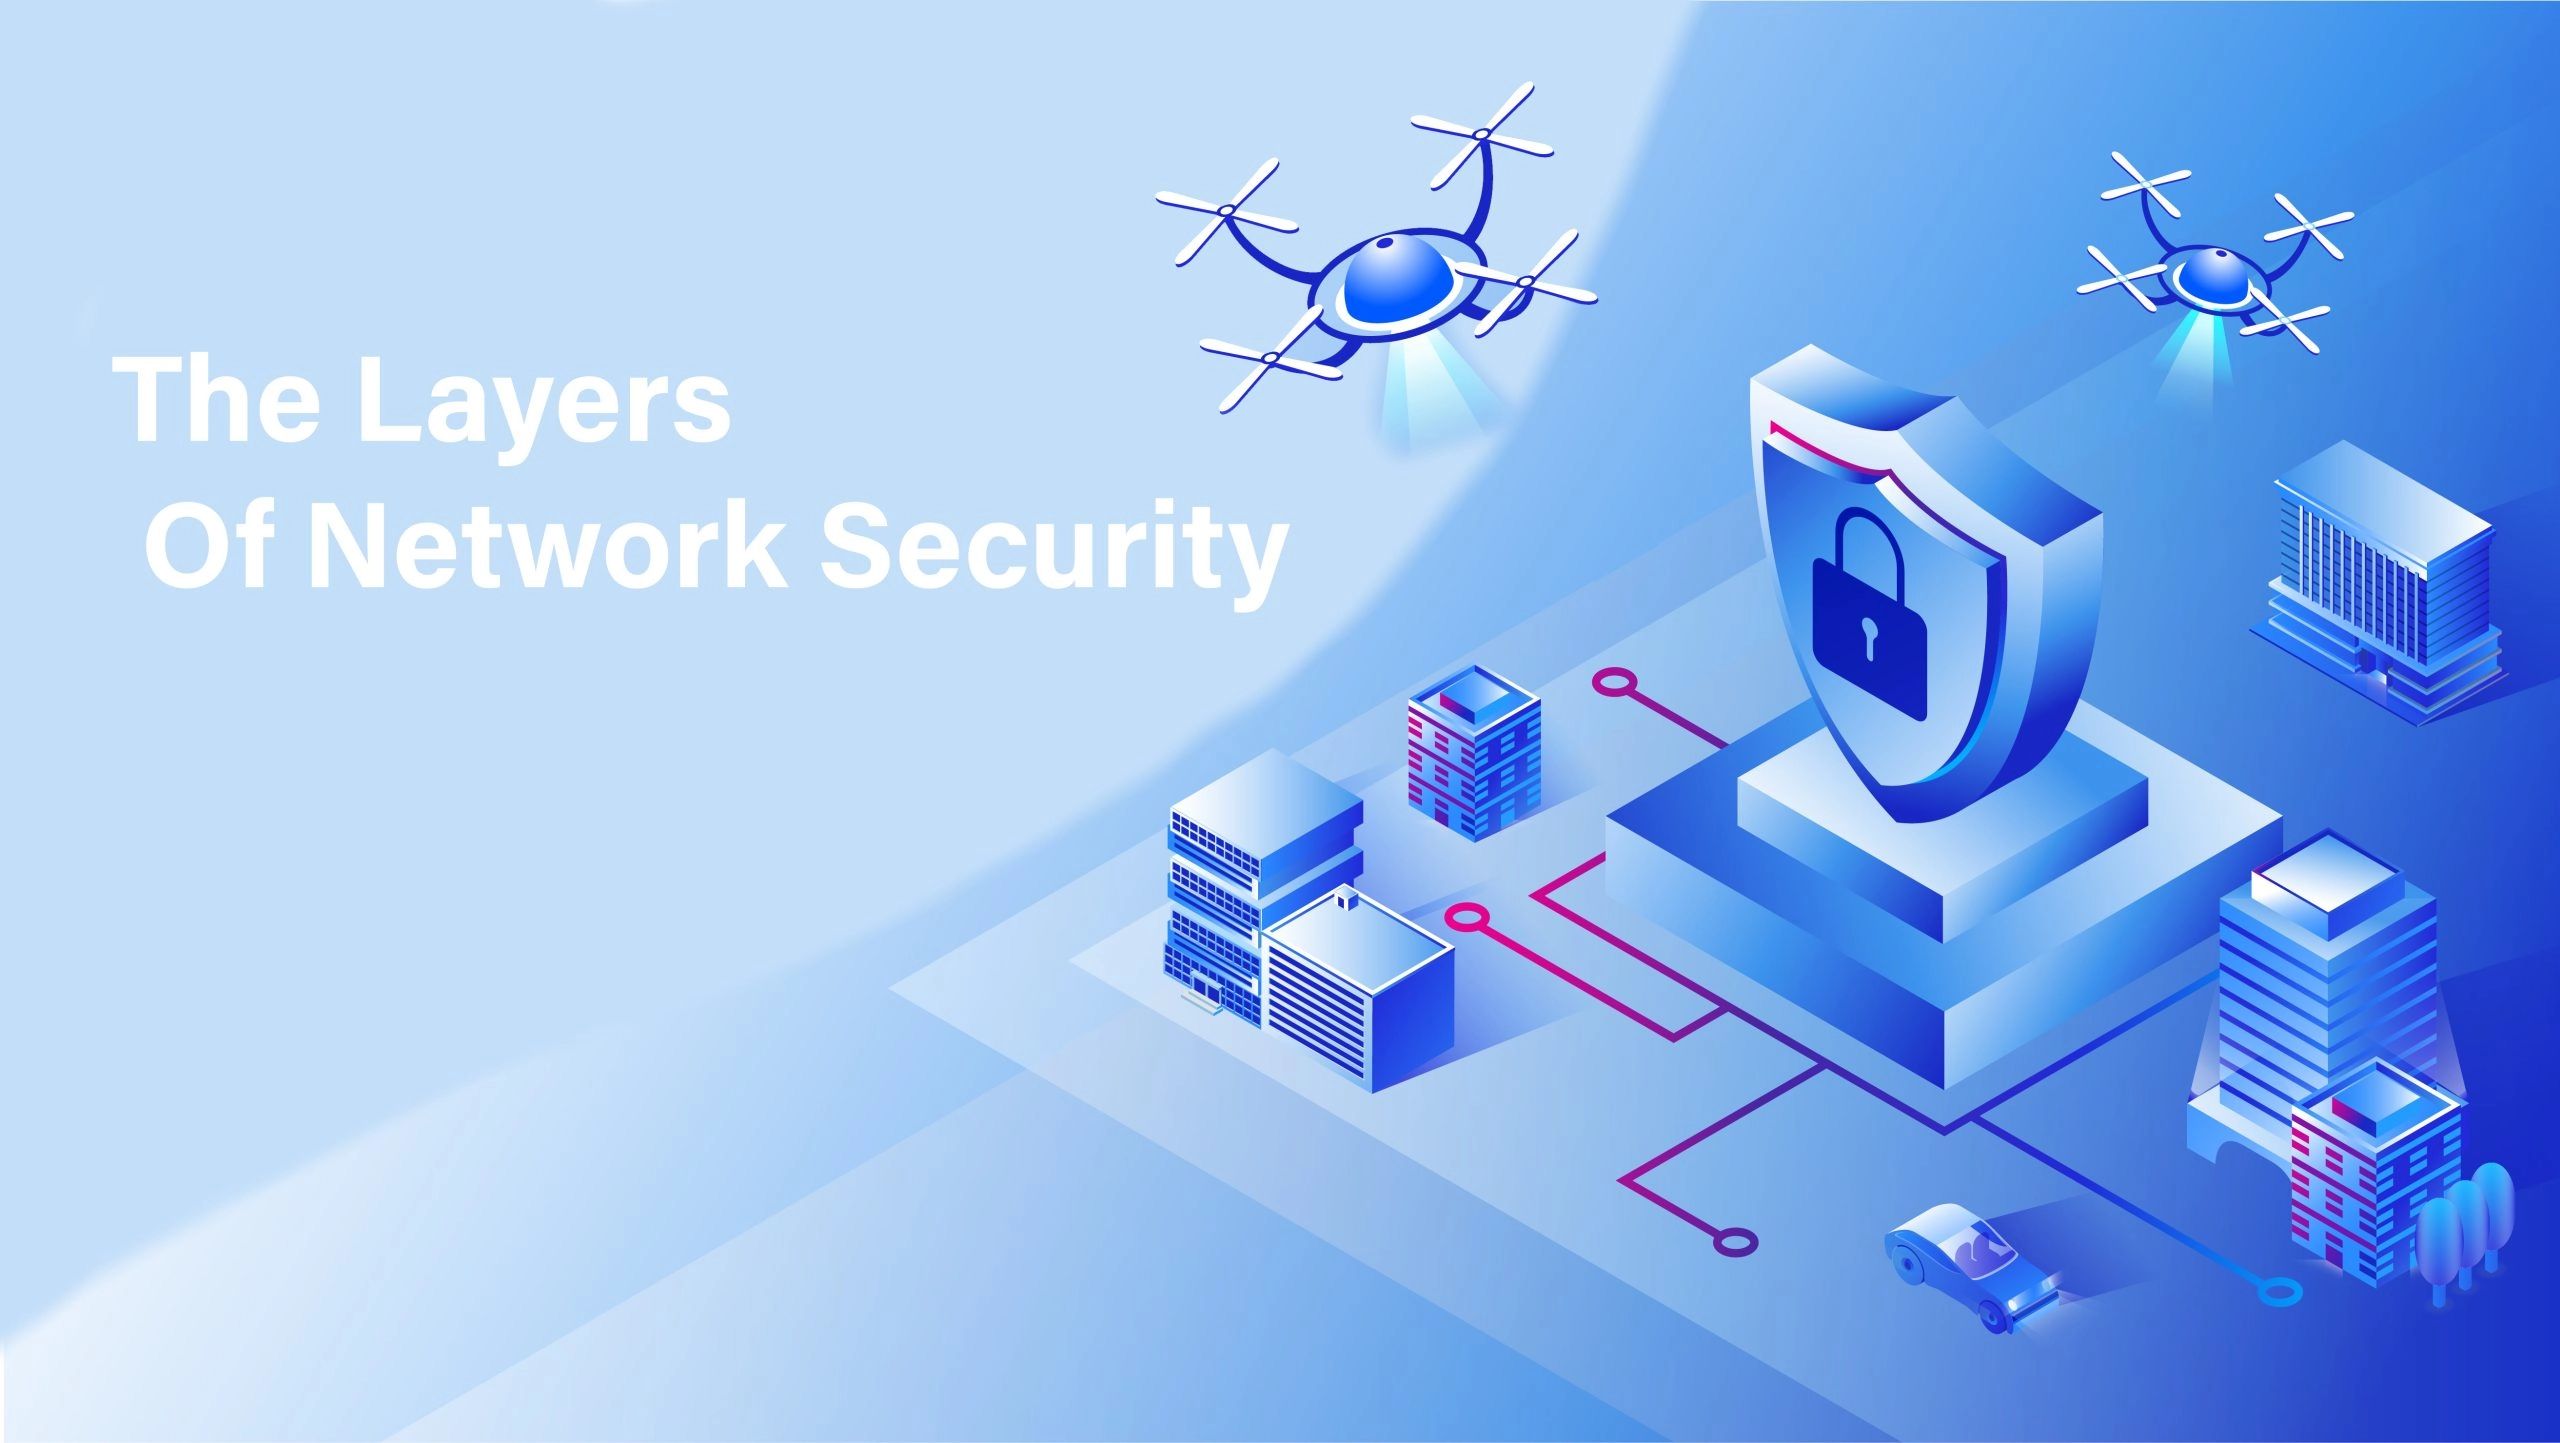 Network layers and security